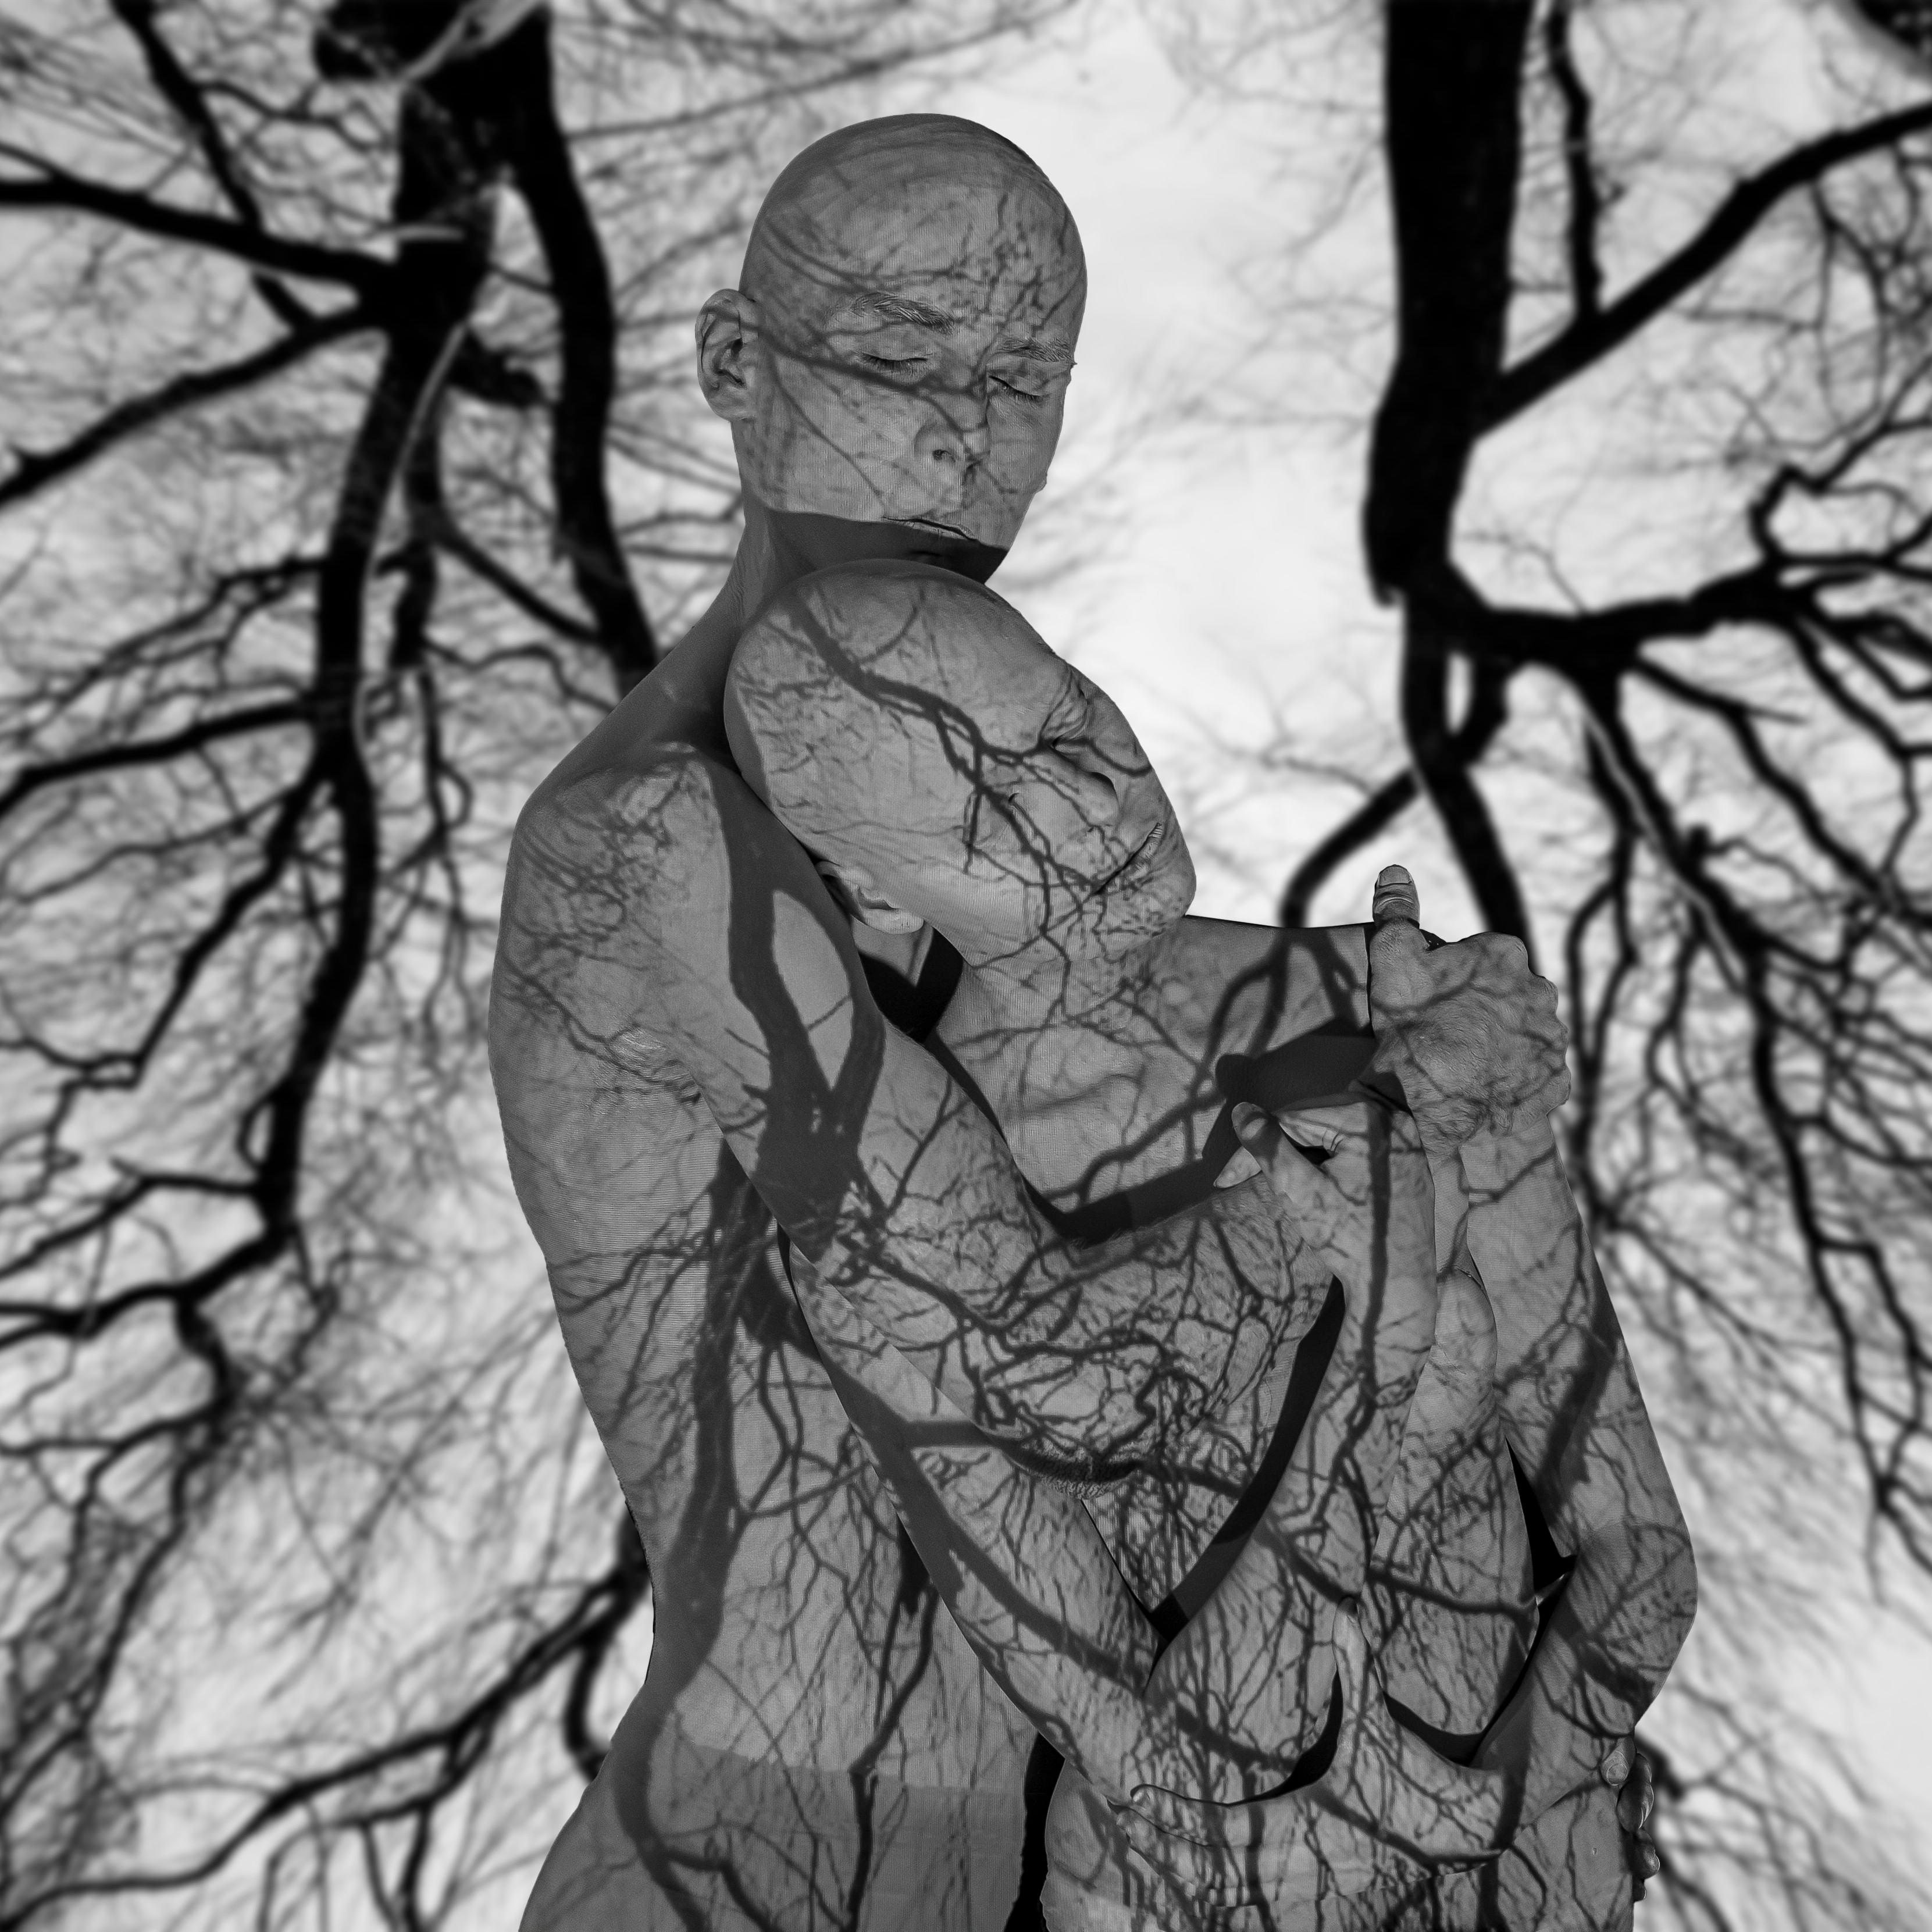 Every man is a tree - Rani Bruchstein - Photograph by Unattributed